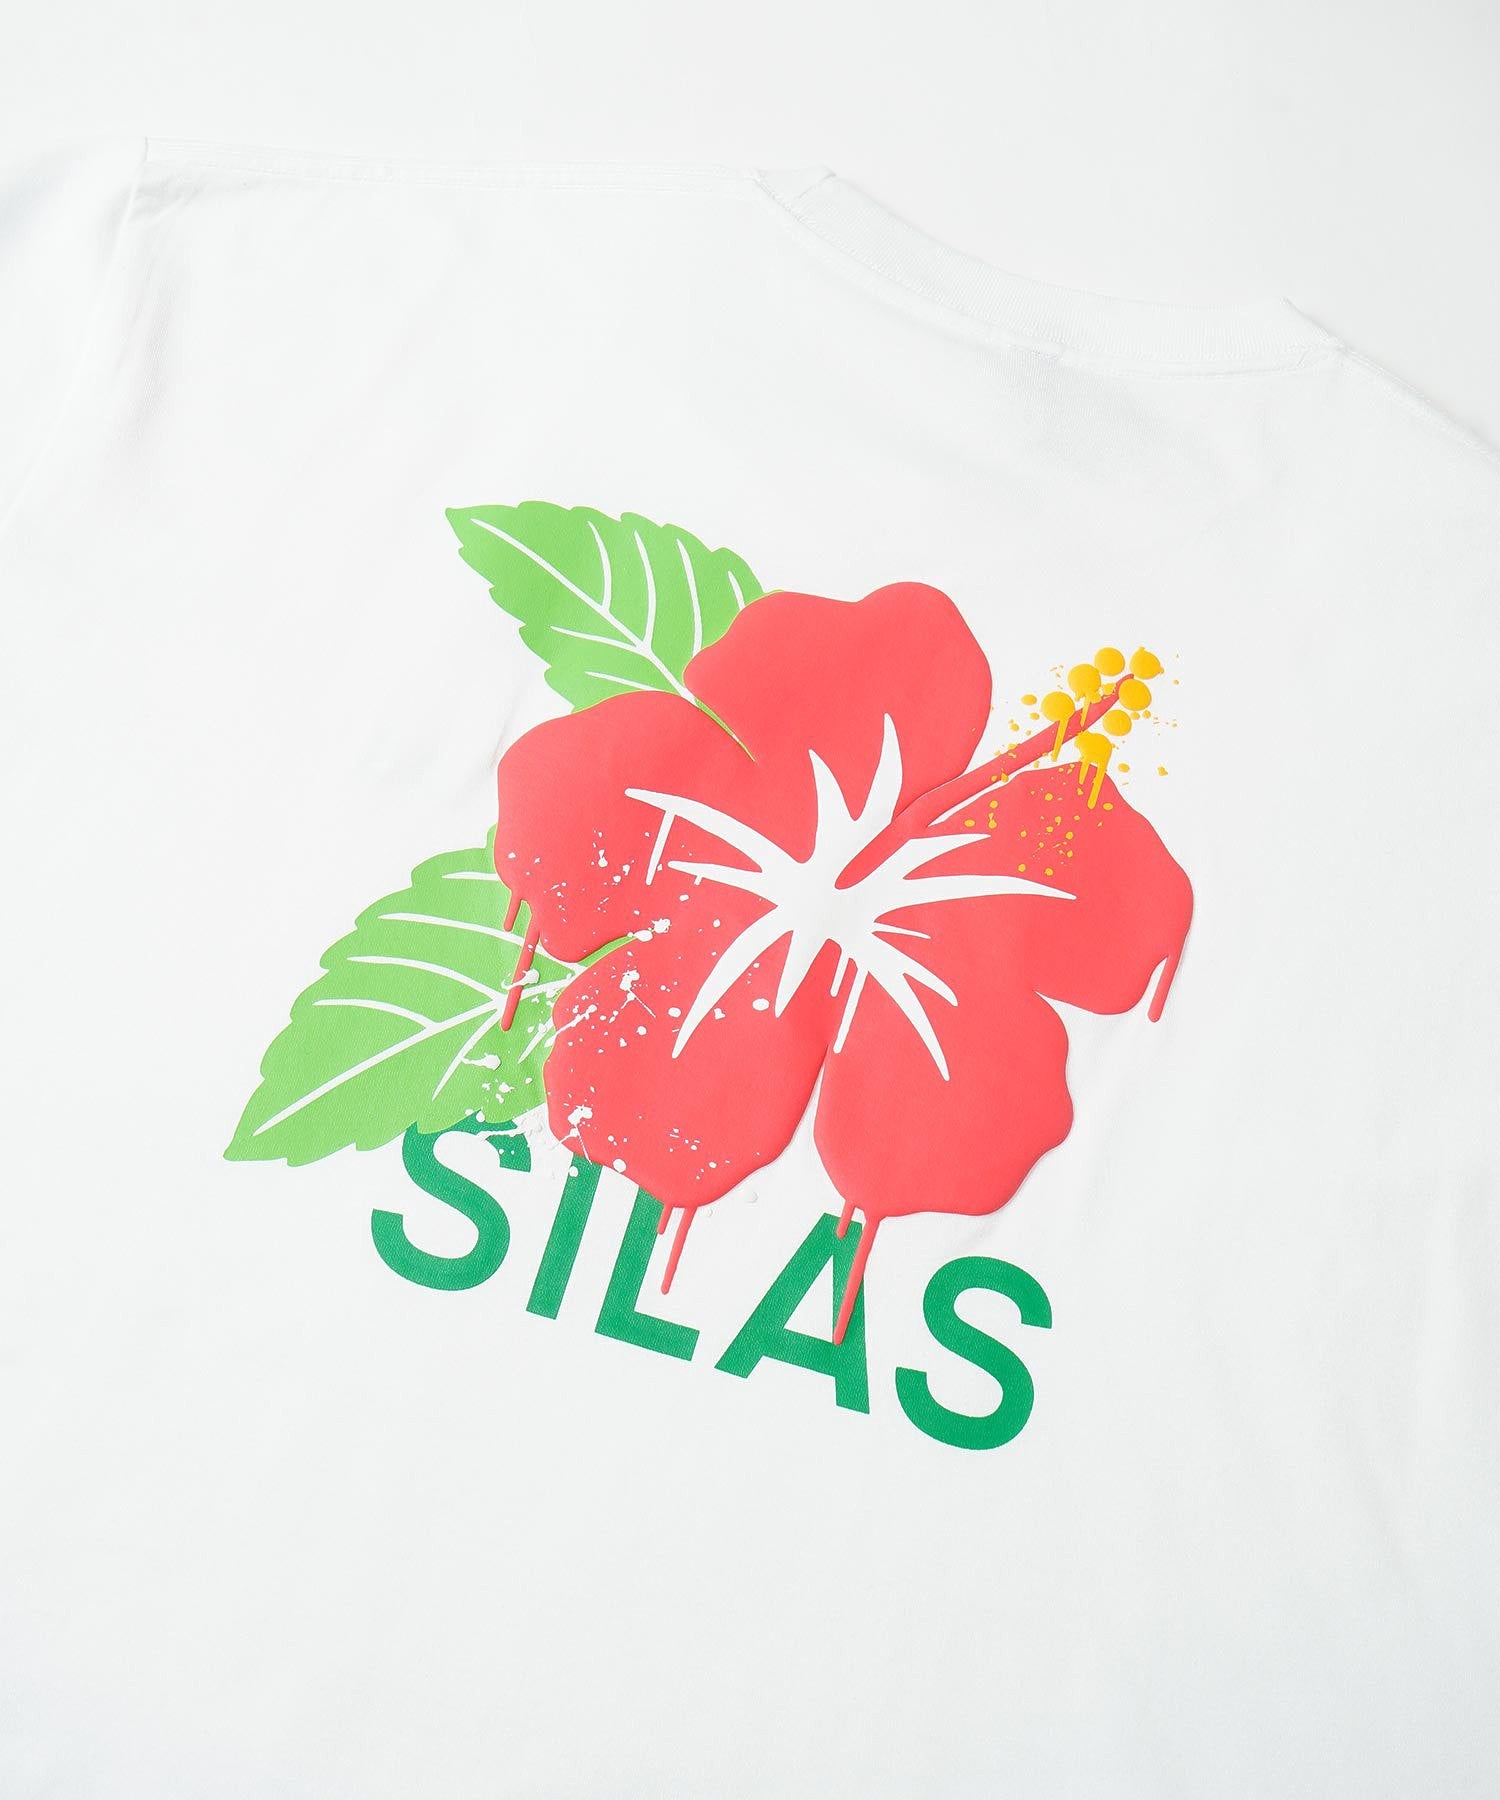 HIBISCUS PRINT L/S TEE SILAS